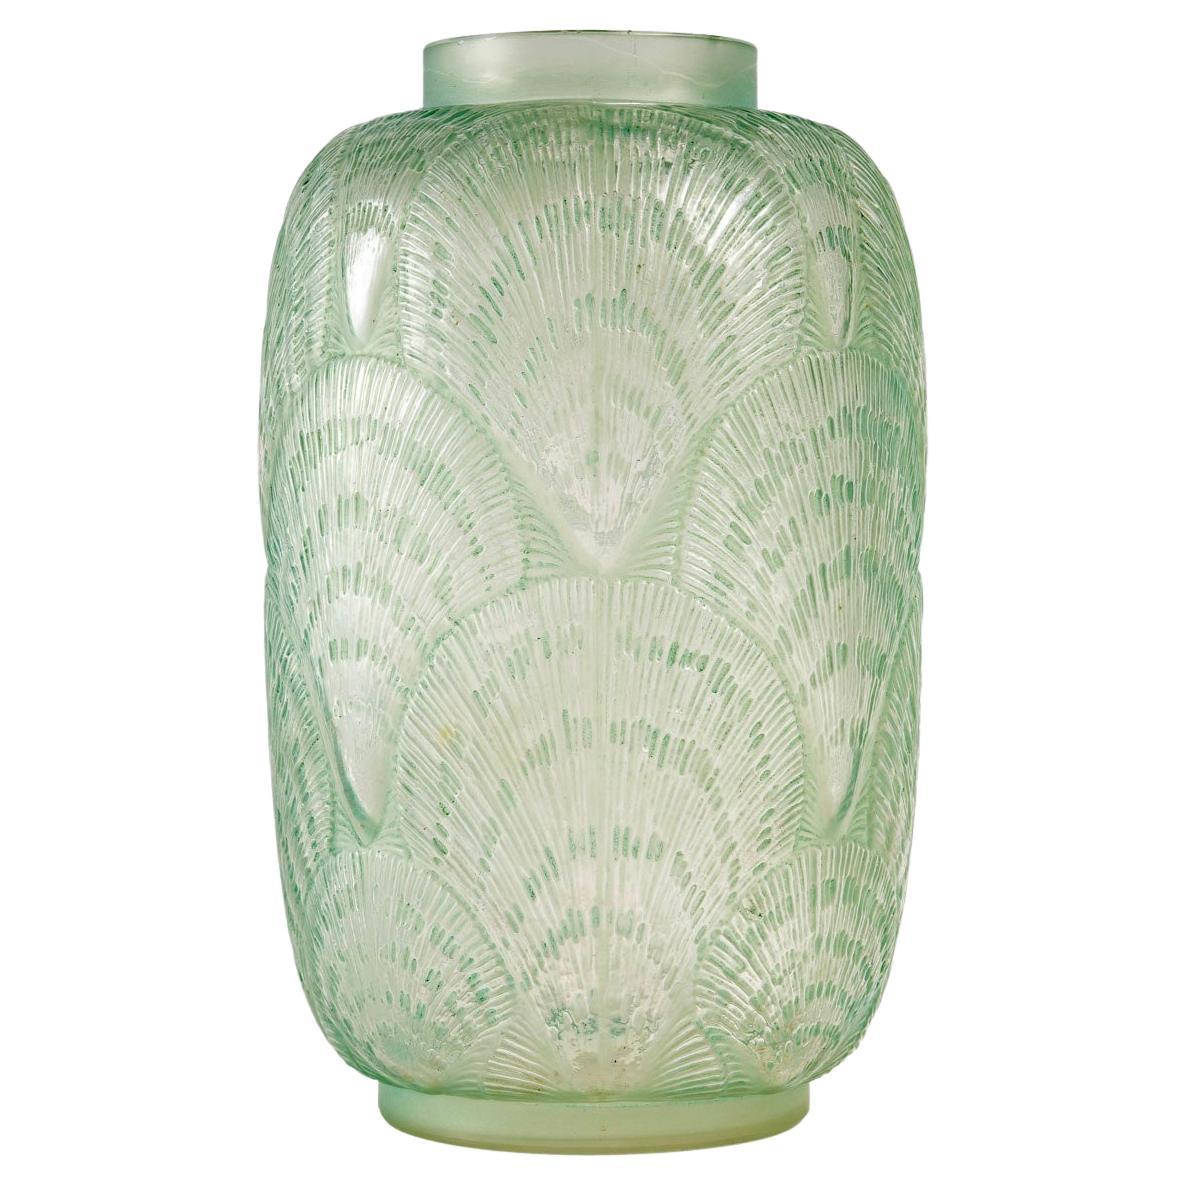 1920 René Lalique Coquille Vase in Frosted Glass with Green Stain